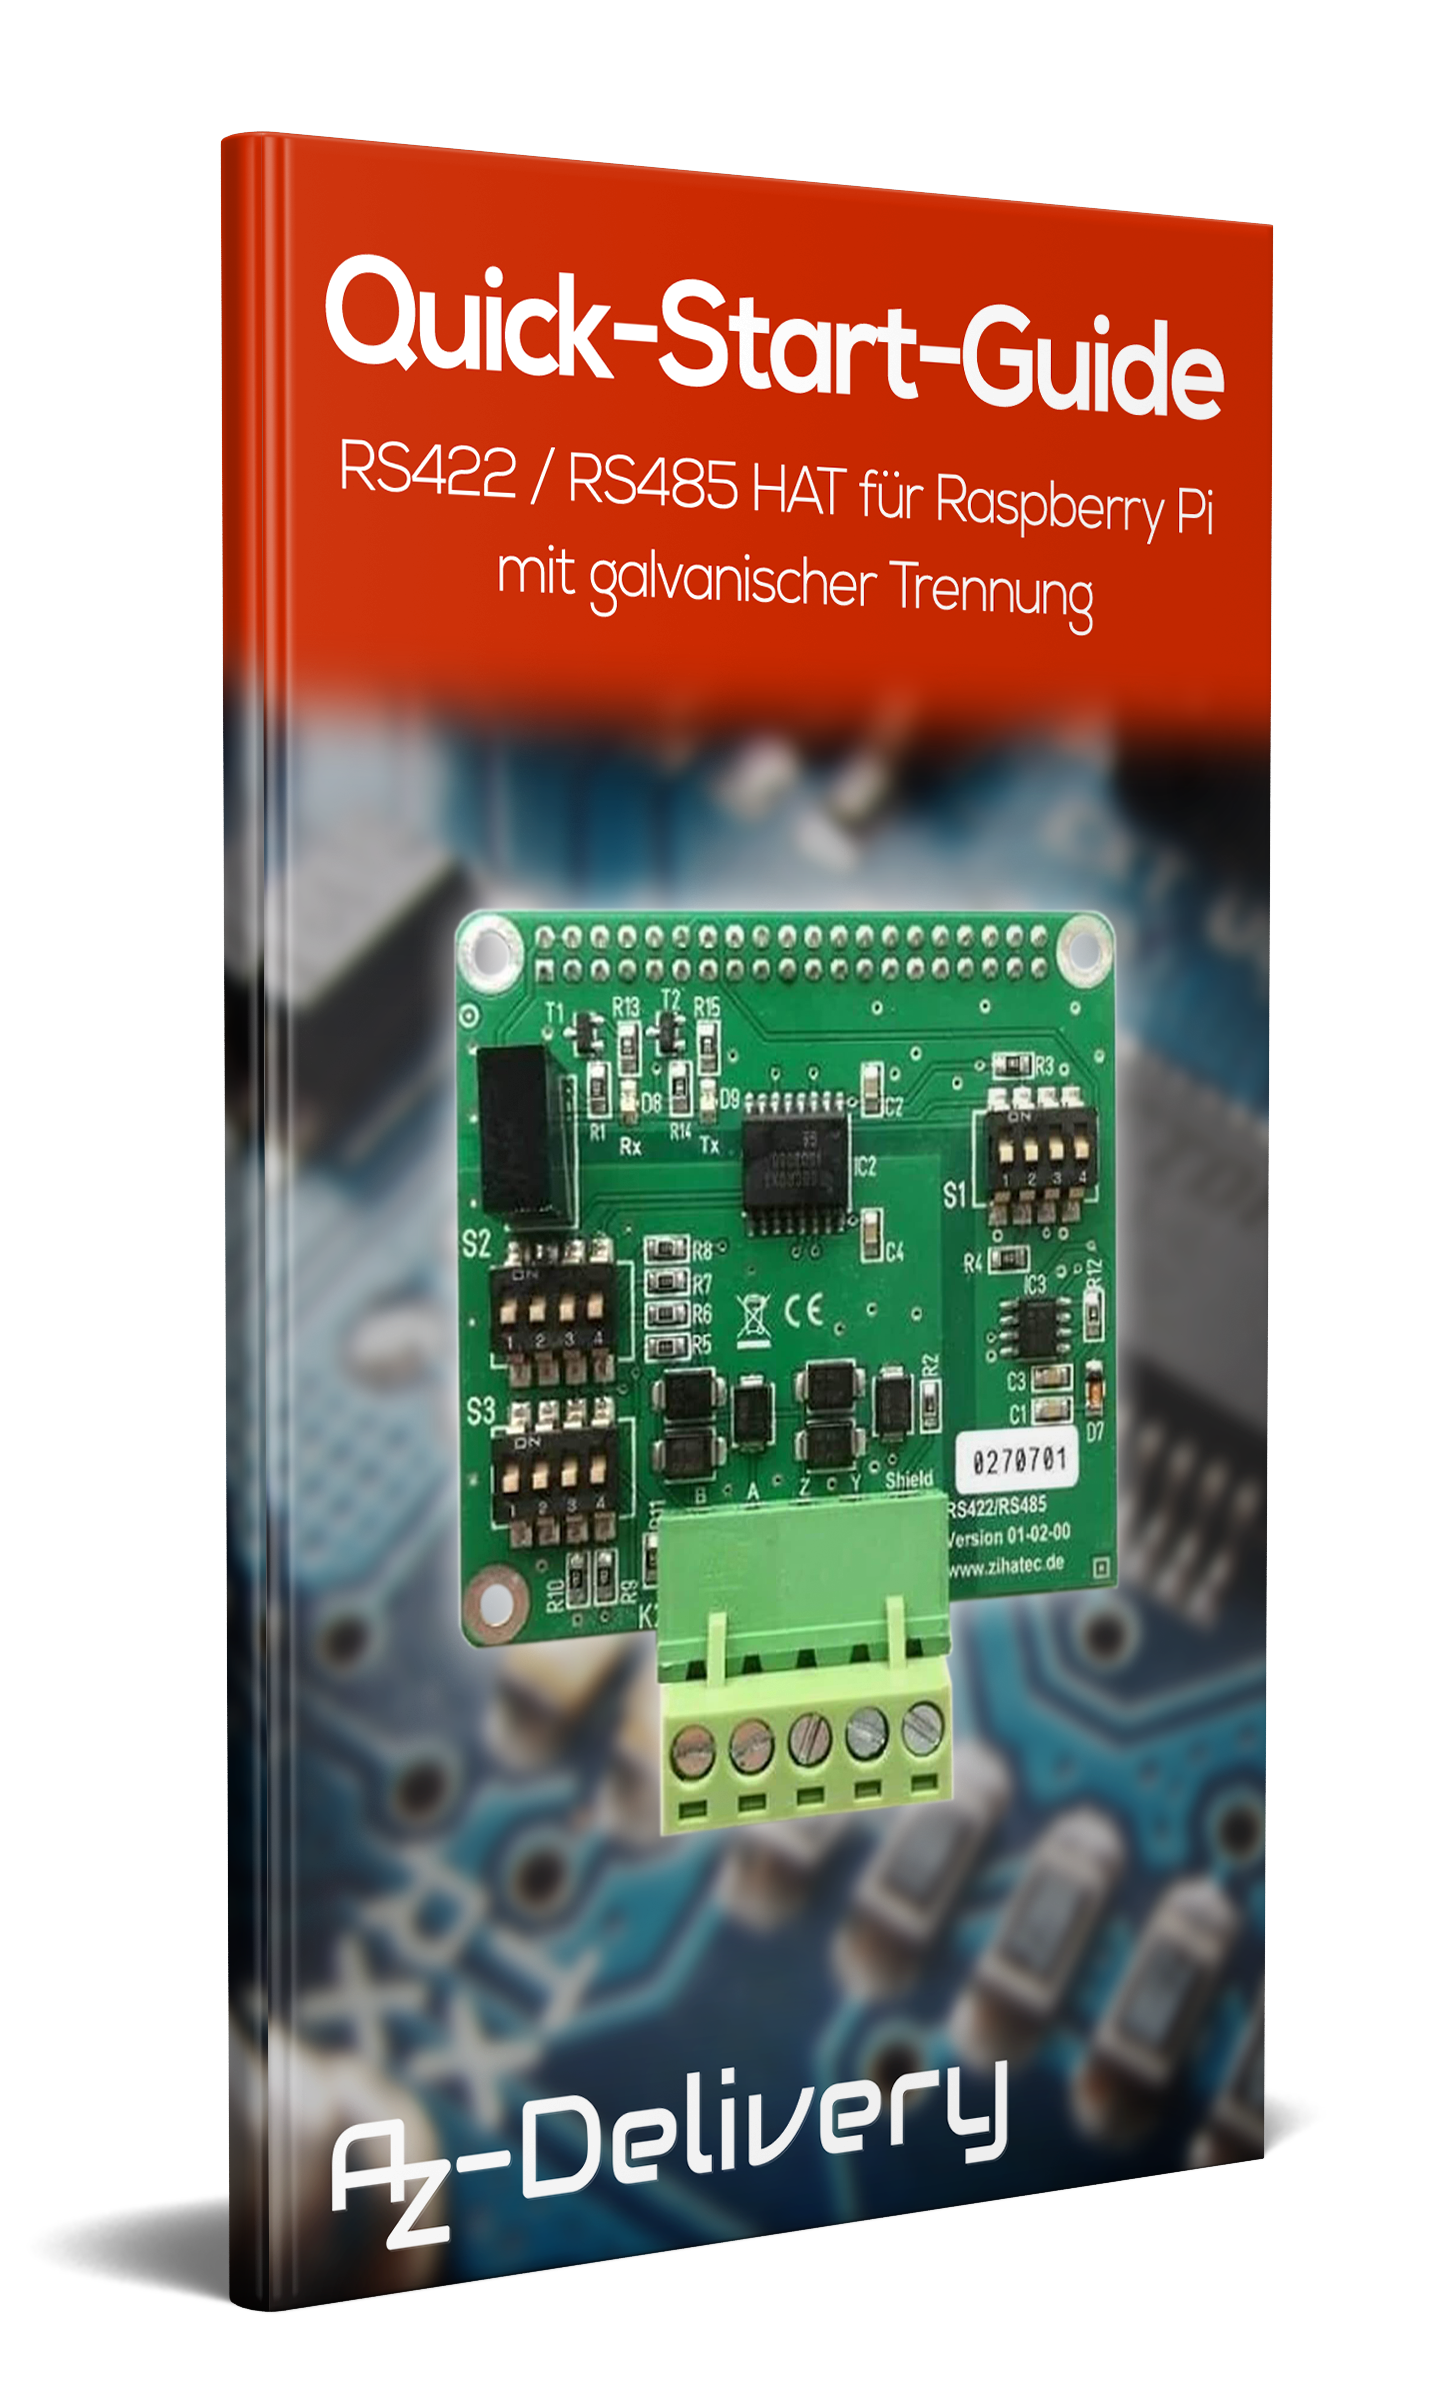 RS422 / RS485 has for Raspberry Pi with a galvanic separation